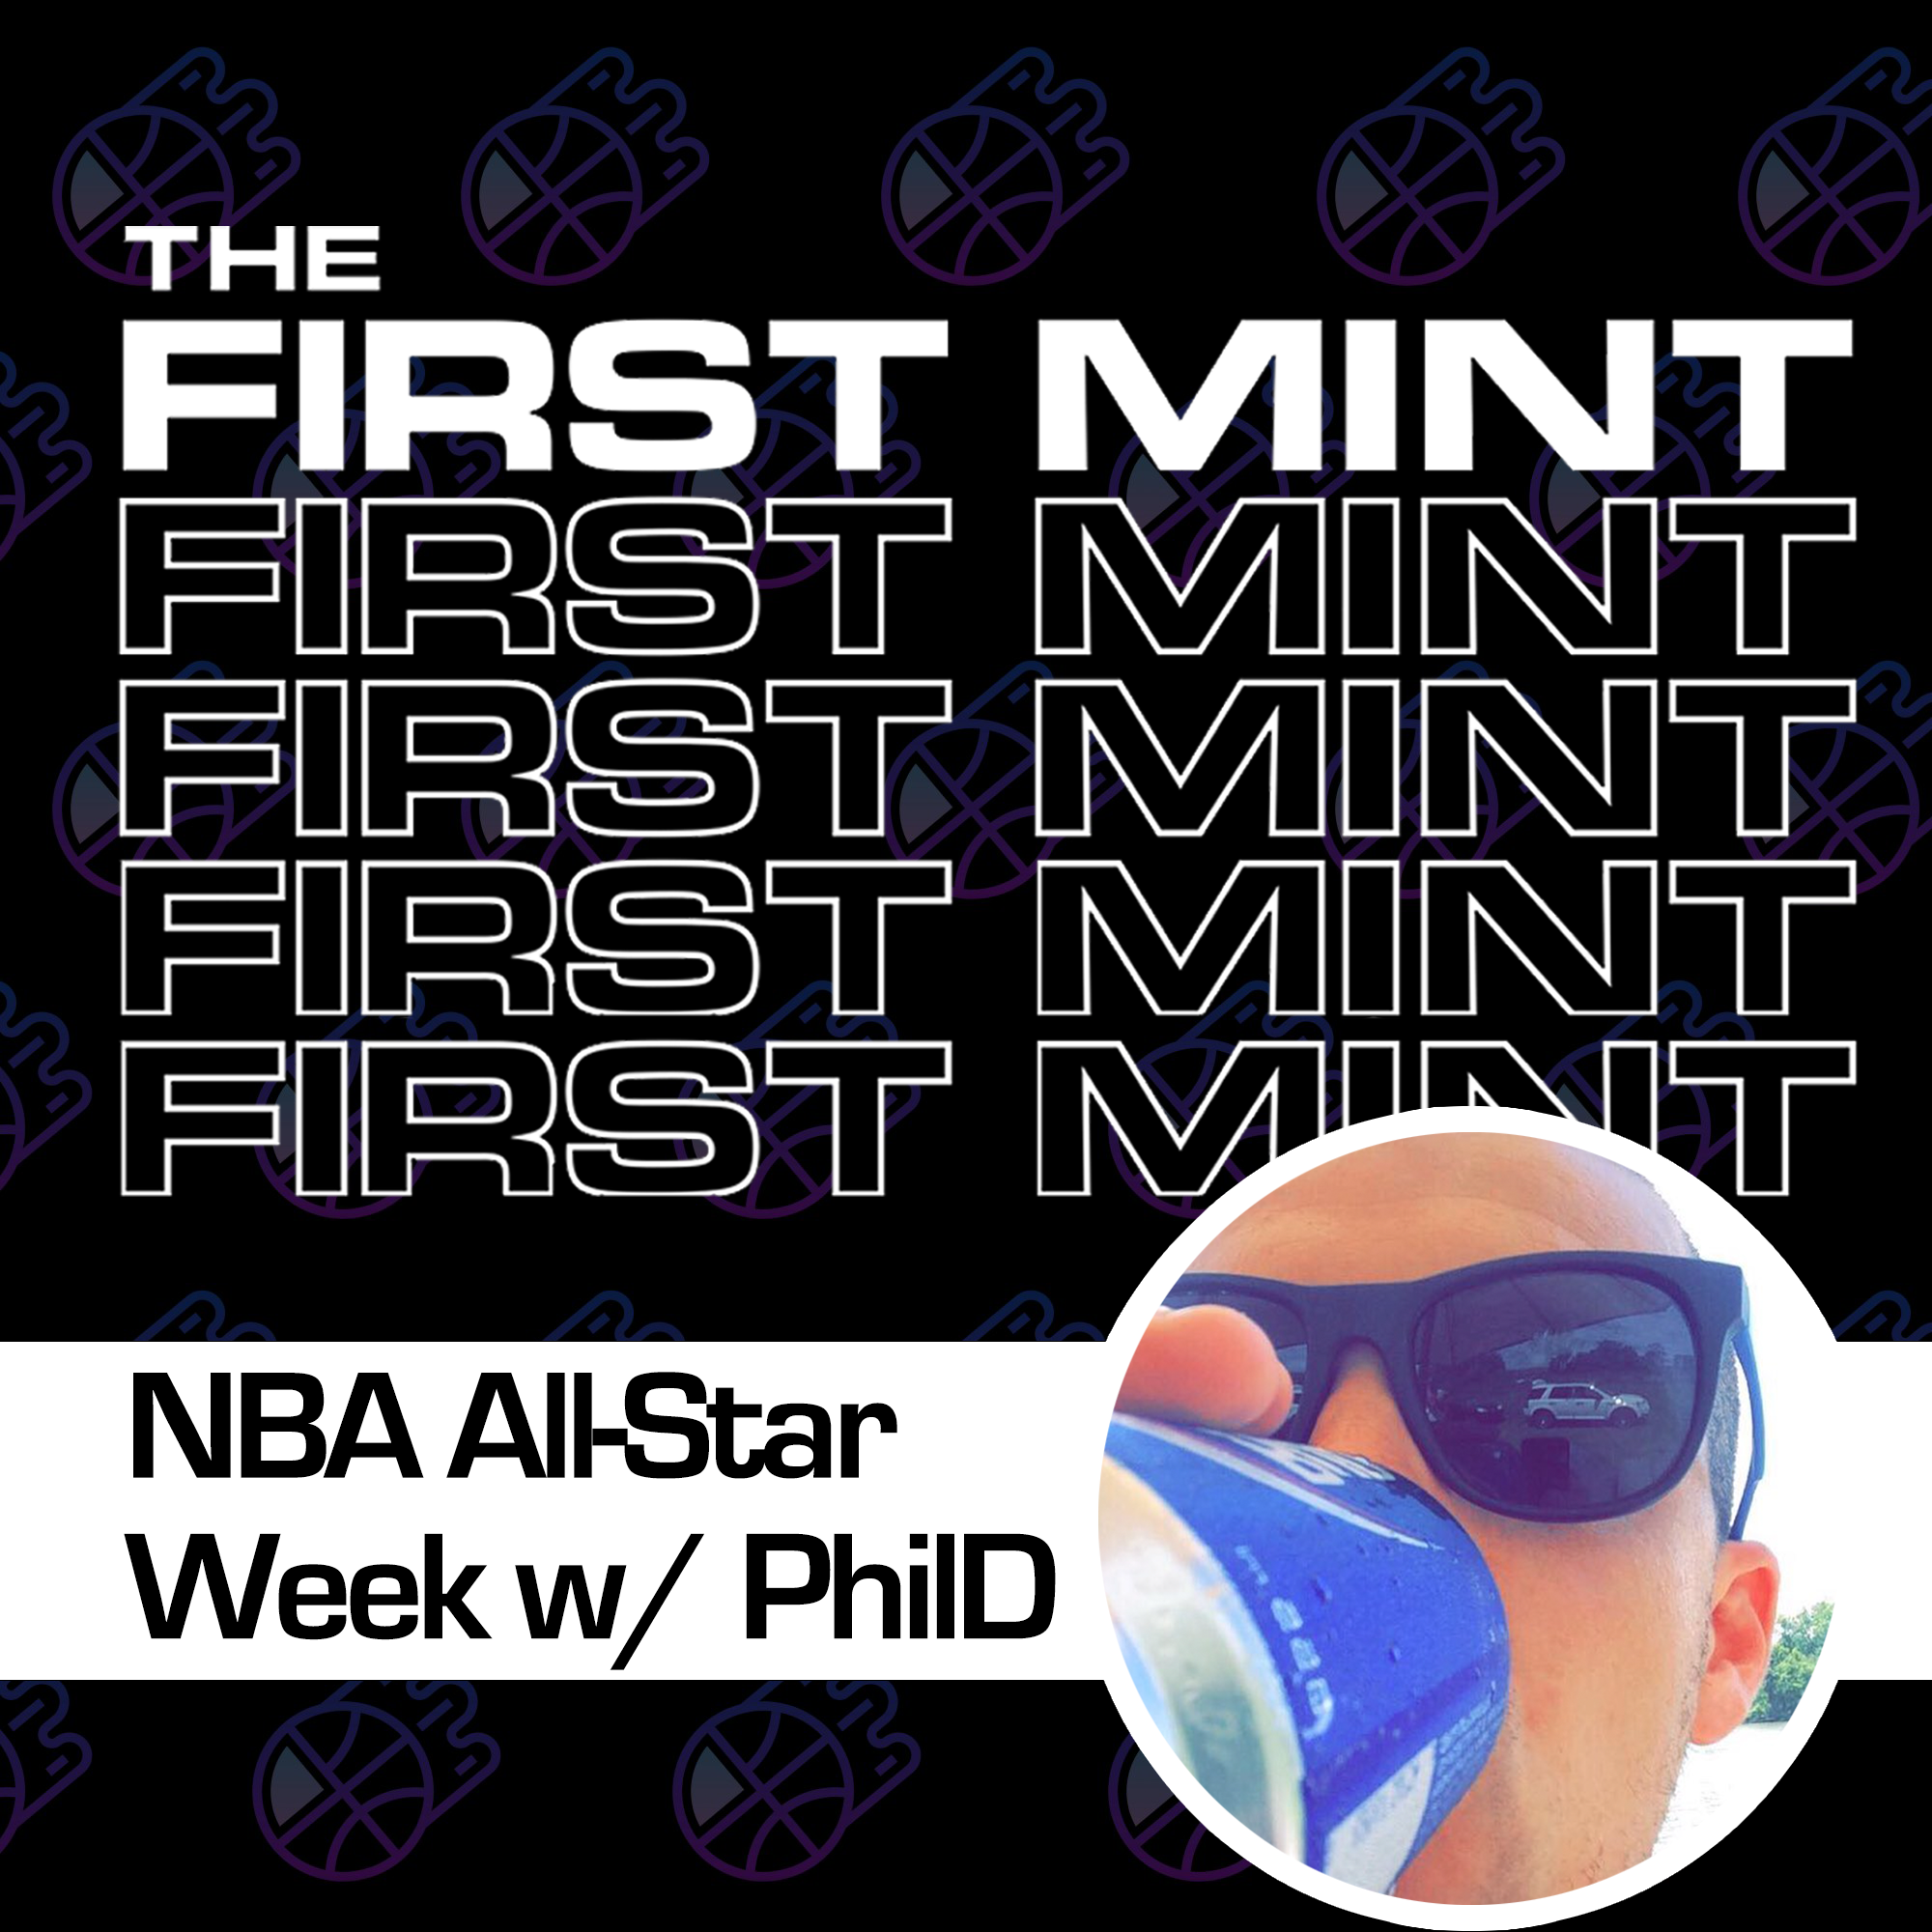 NBA All Star Week on the Marketplace [FEAT. PHIL D] coverart